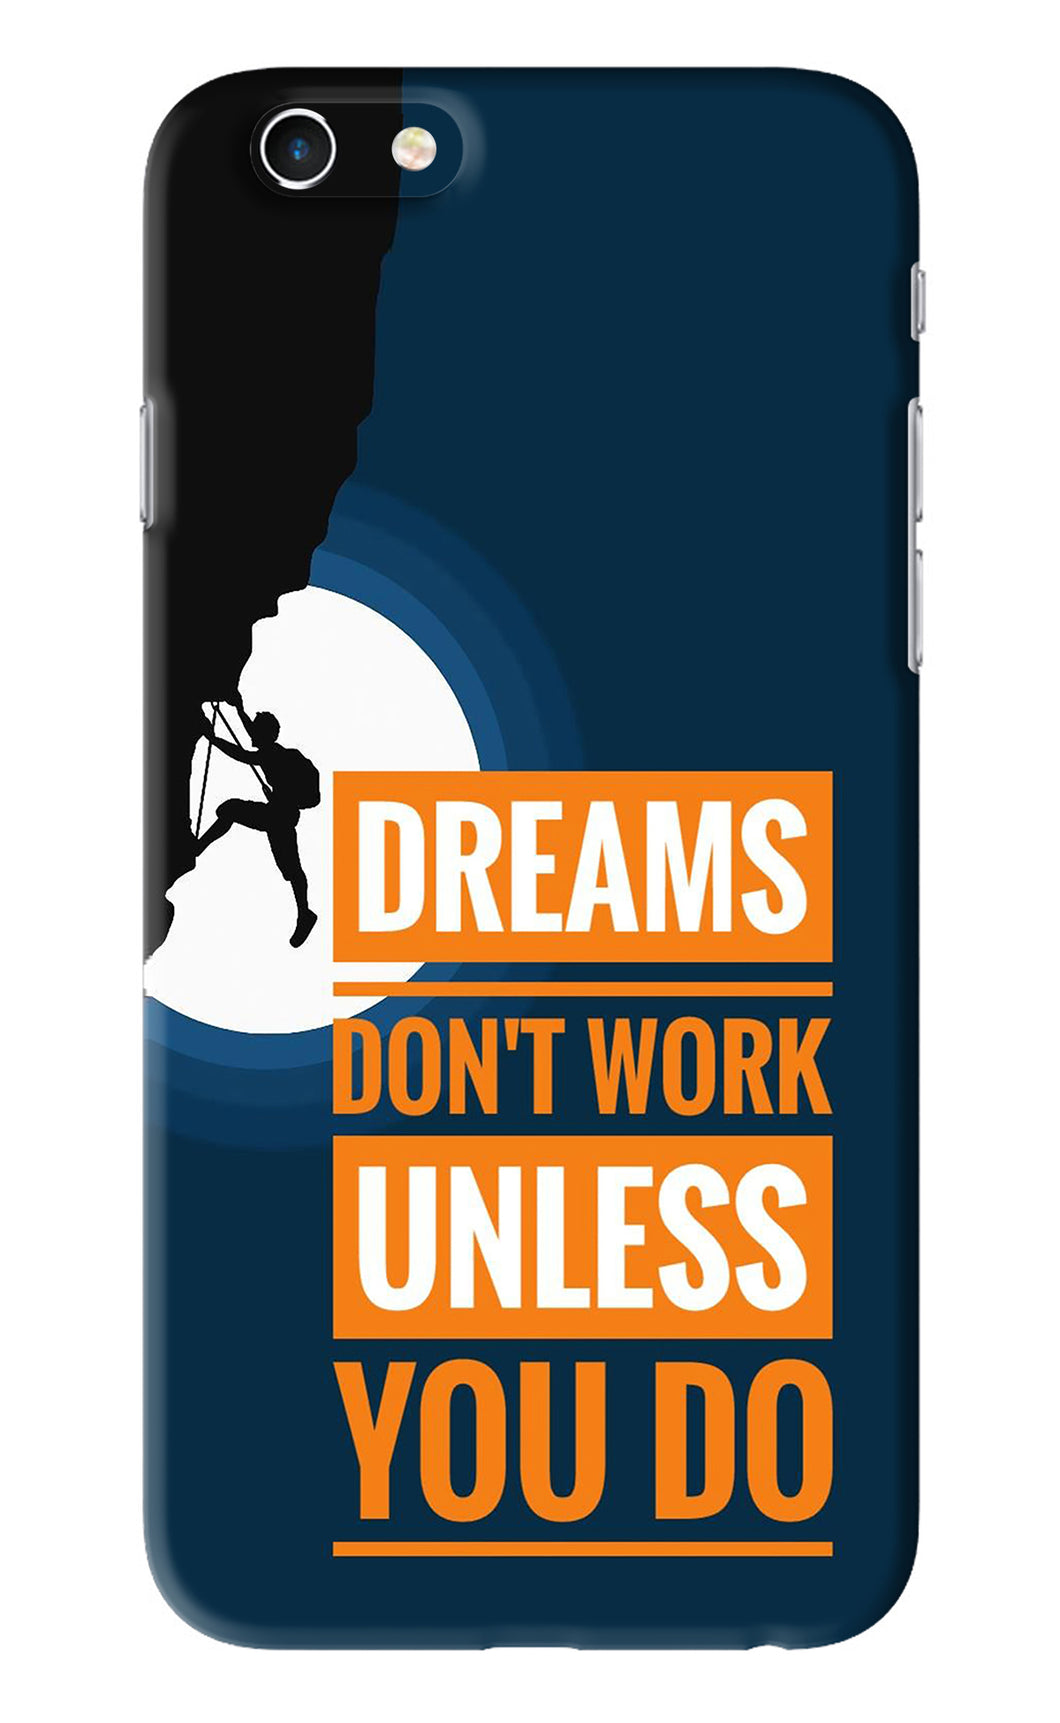 Dreams Don’T Work Unless You Do iPhone 6 Back Skin Wrap